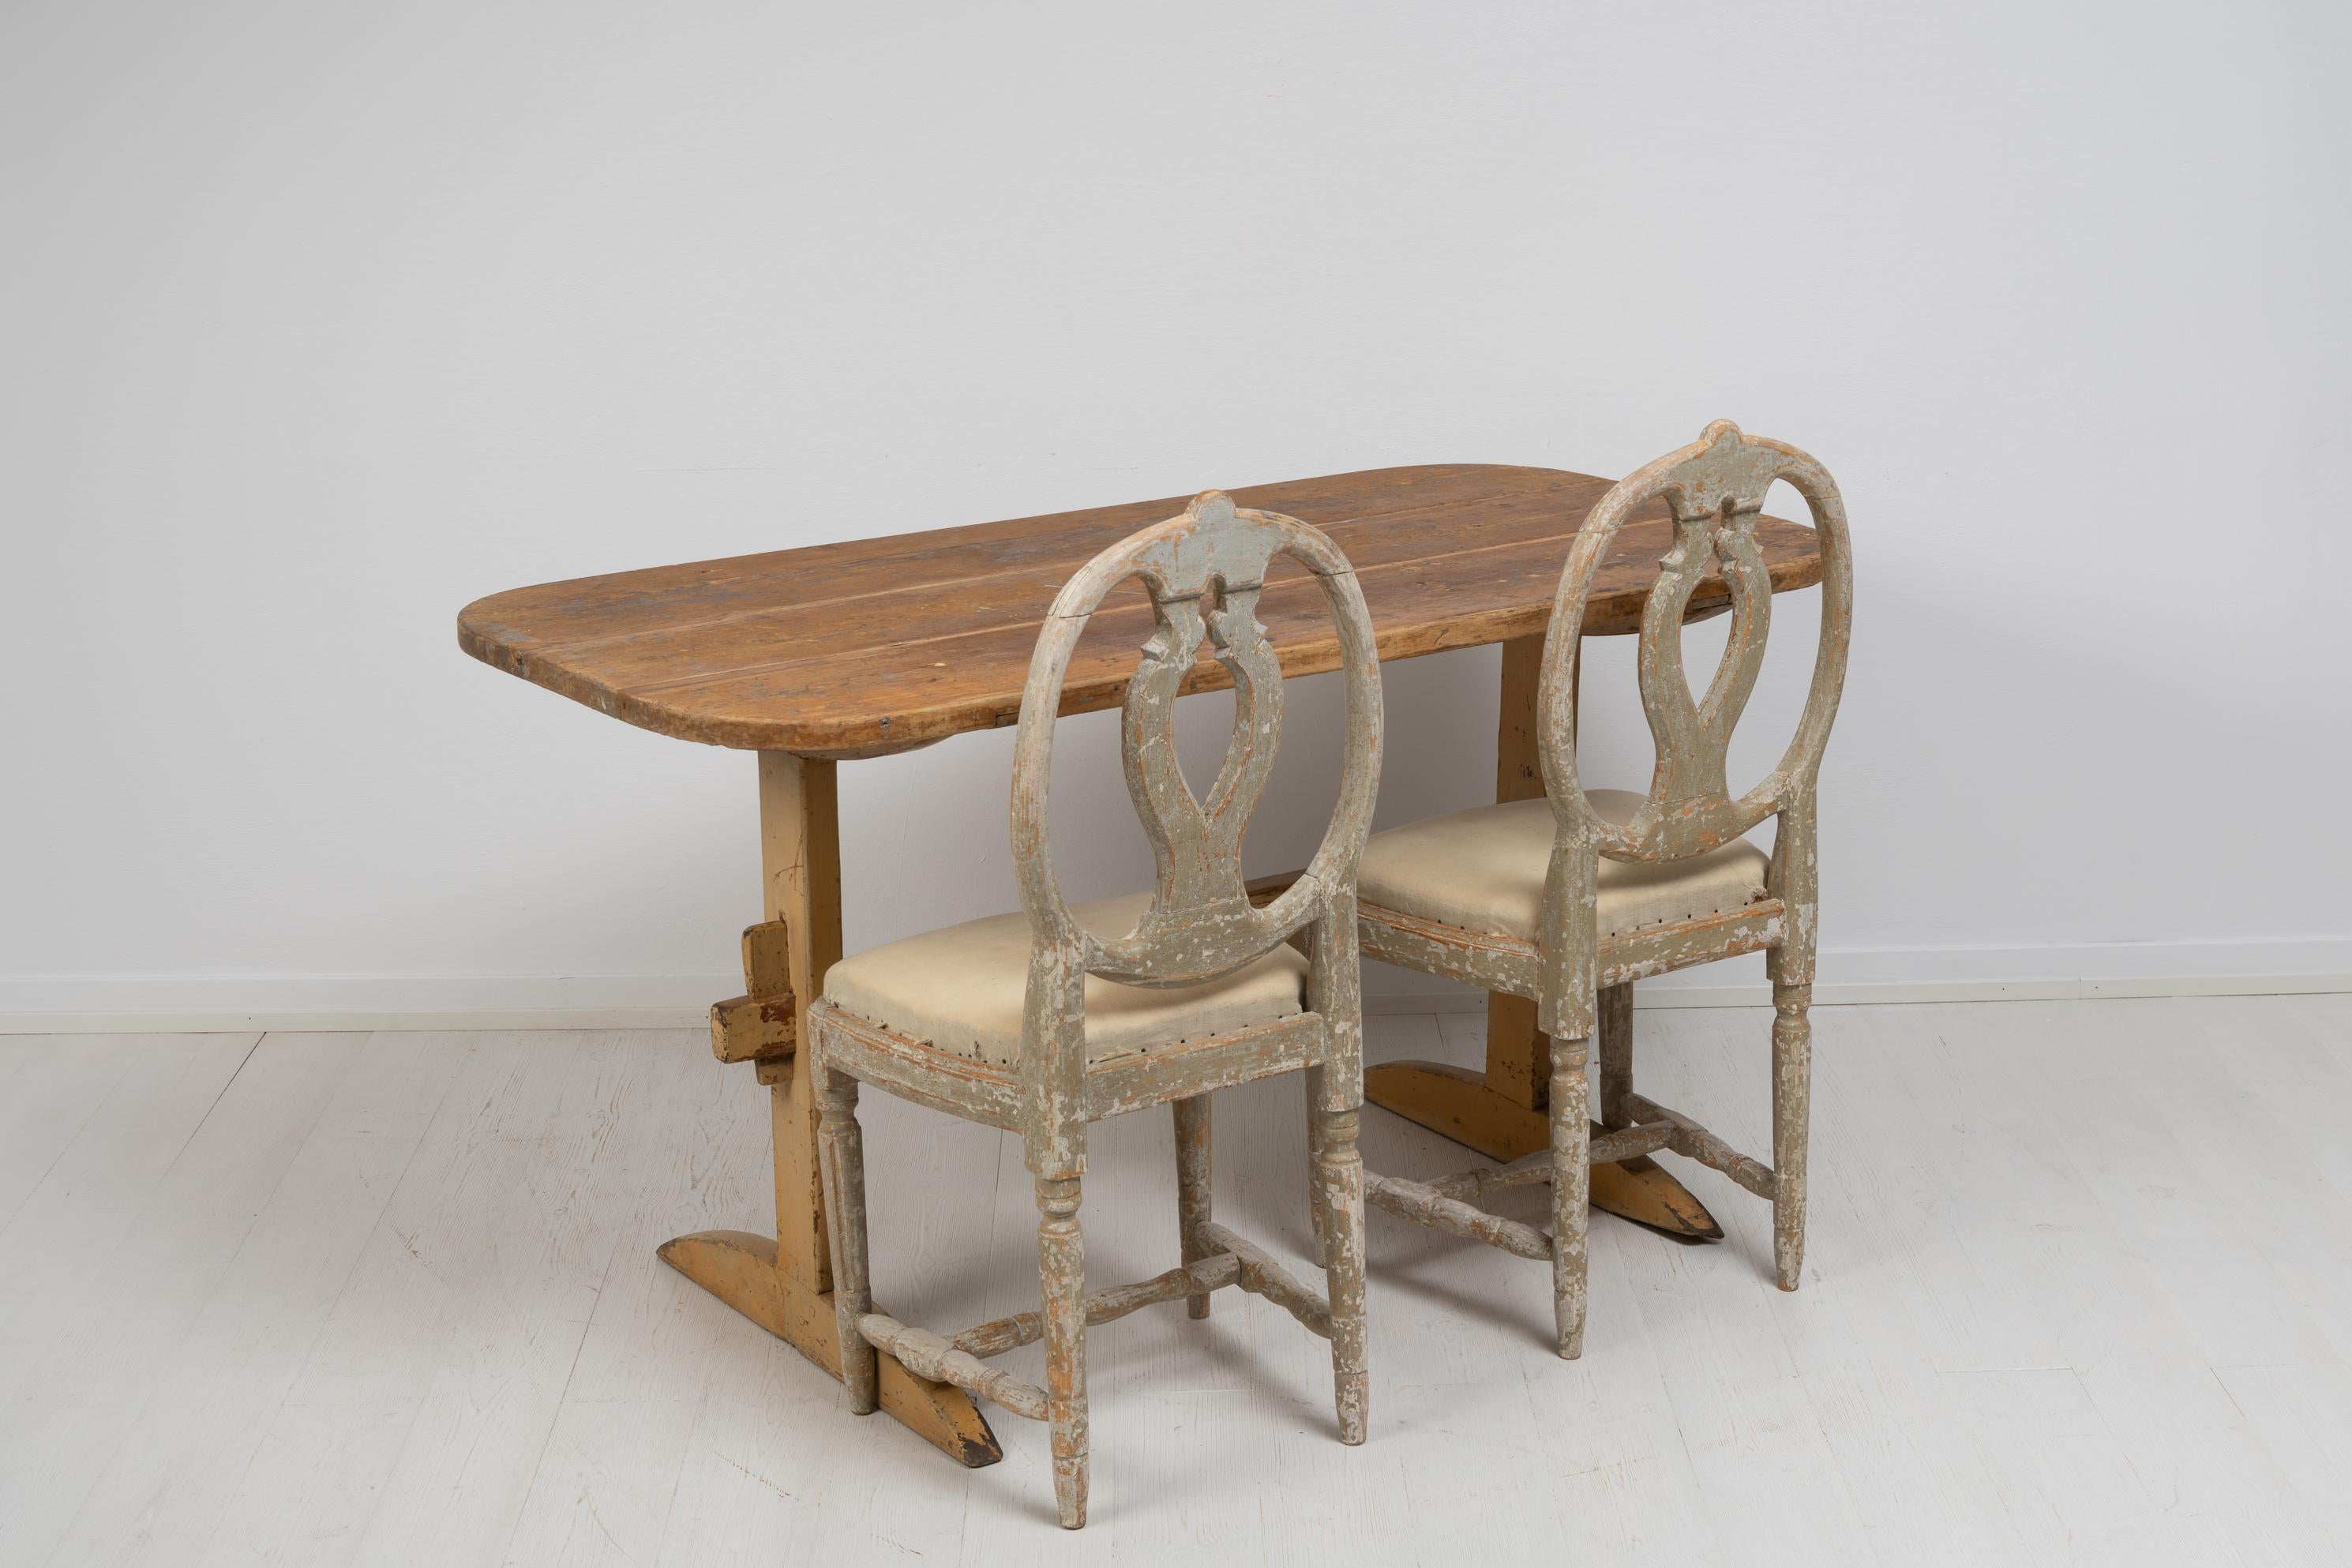 Swedish Pine Country Home Folk Art Dining Table In Good Condition For Sale In Kramfors, SE